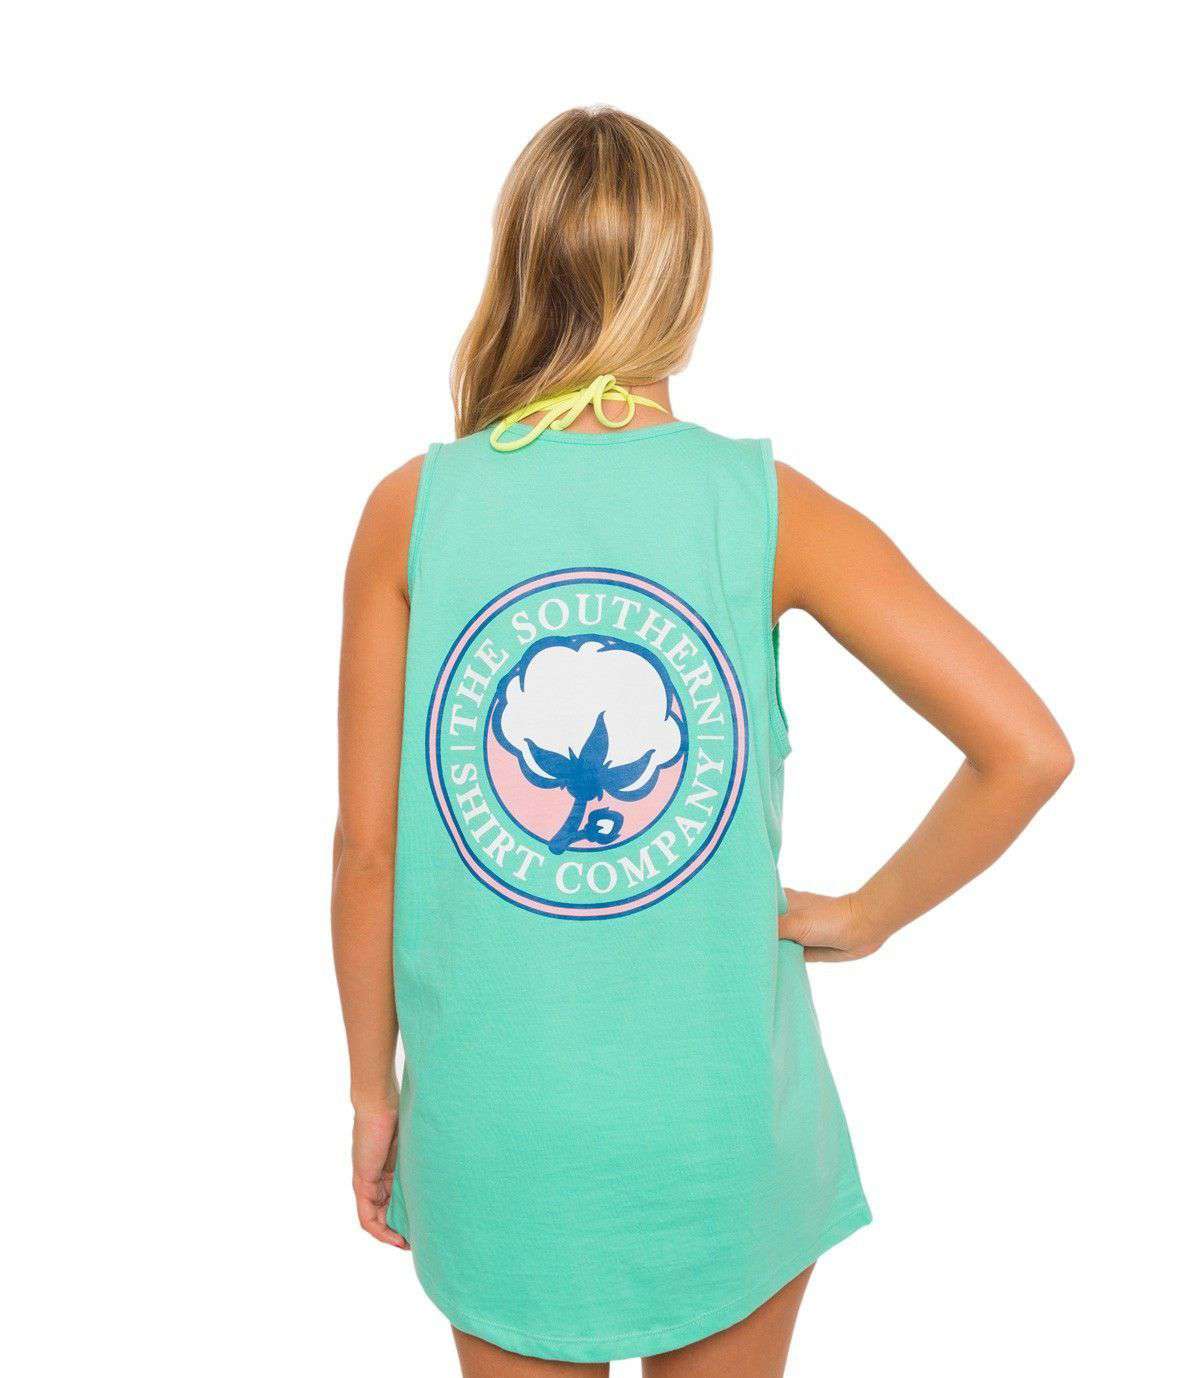 Jenny Tank in Bermuda by The Southern Shirt Co. - Country Club Prep